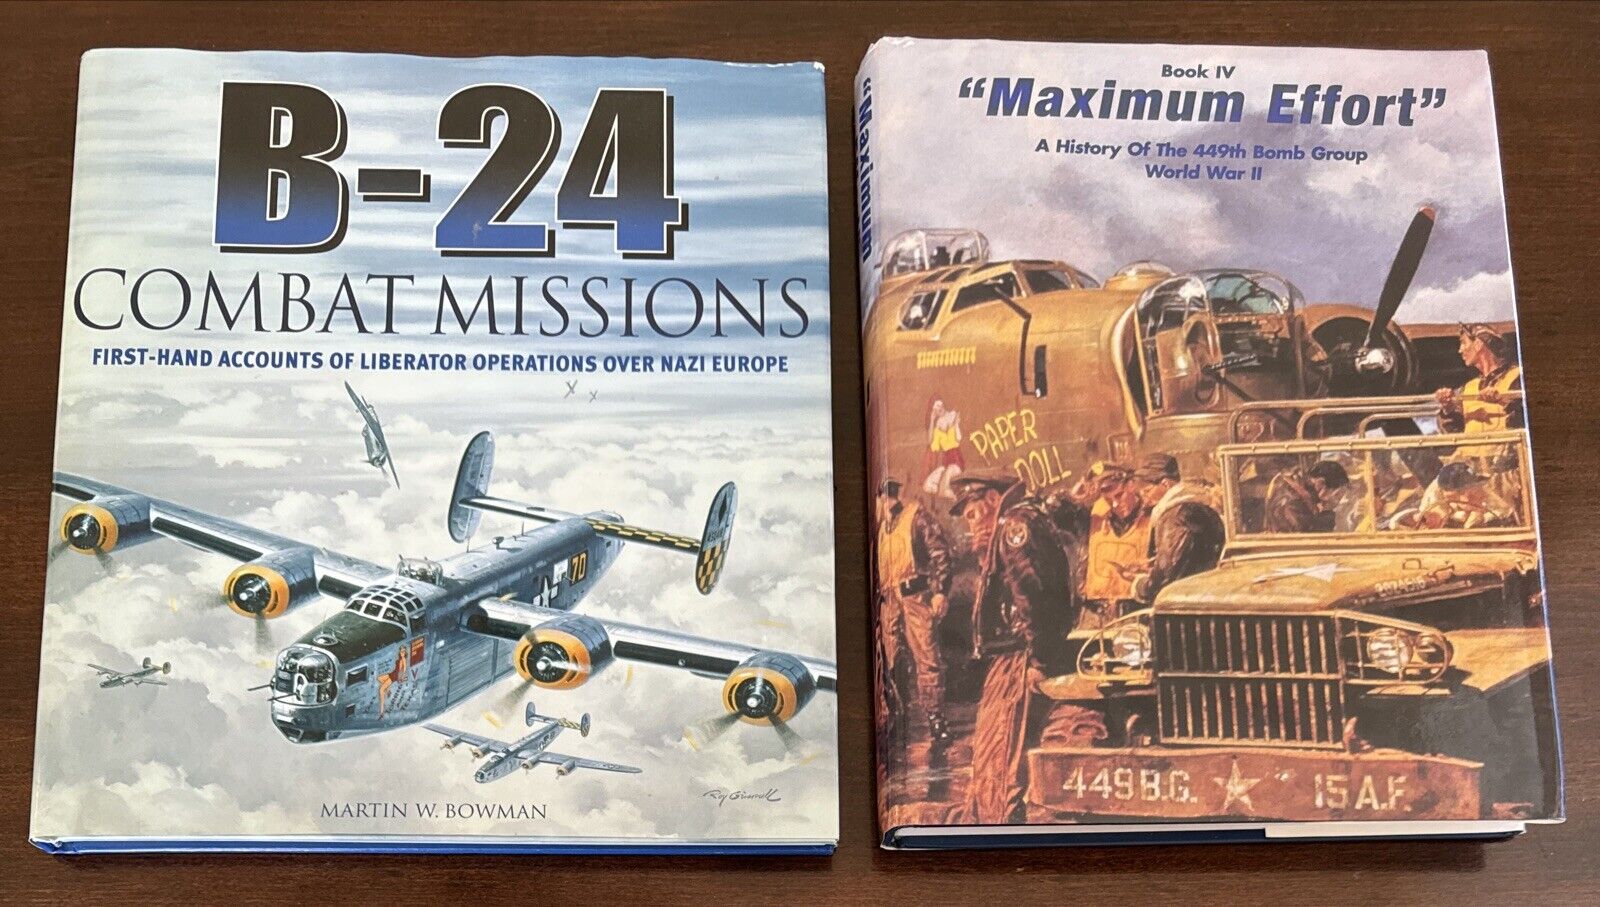 Book IV- Maximum Effort: A History of the 449th Bomb Group World War II And B-24